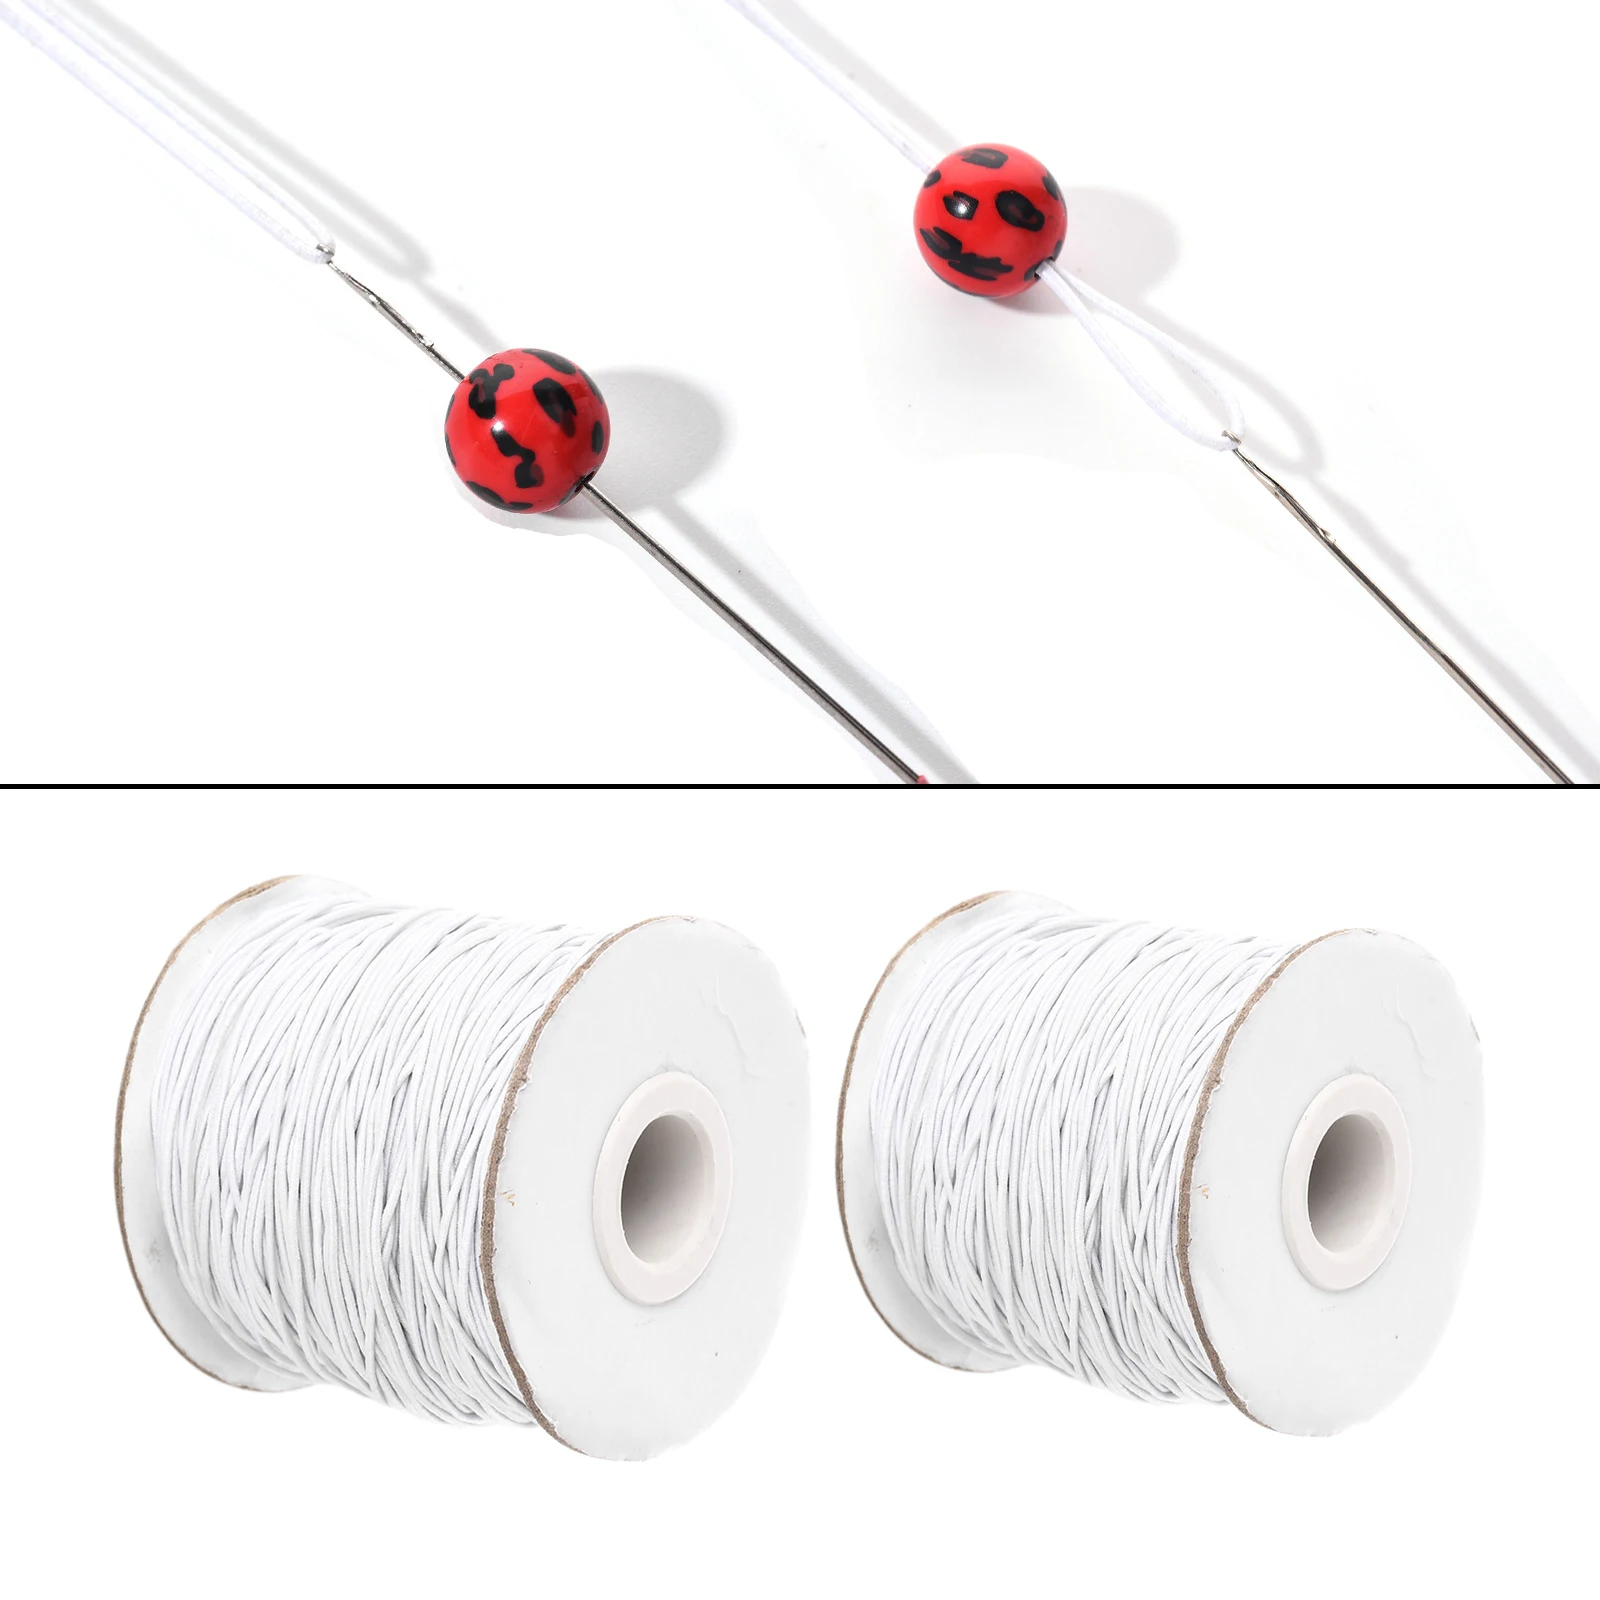 100m Elastic Jewelry Cord Beading String Strong Stretchy Thread Cords For Knitting DIY Crafts Jewelry Making Bracelets